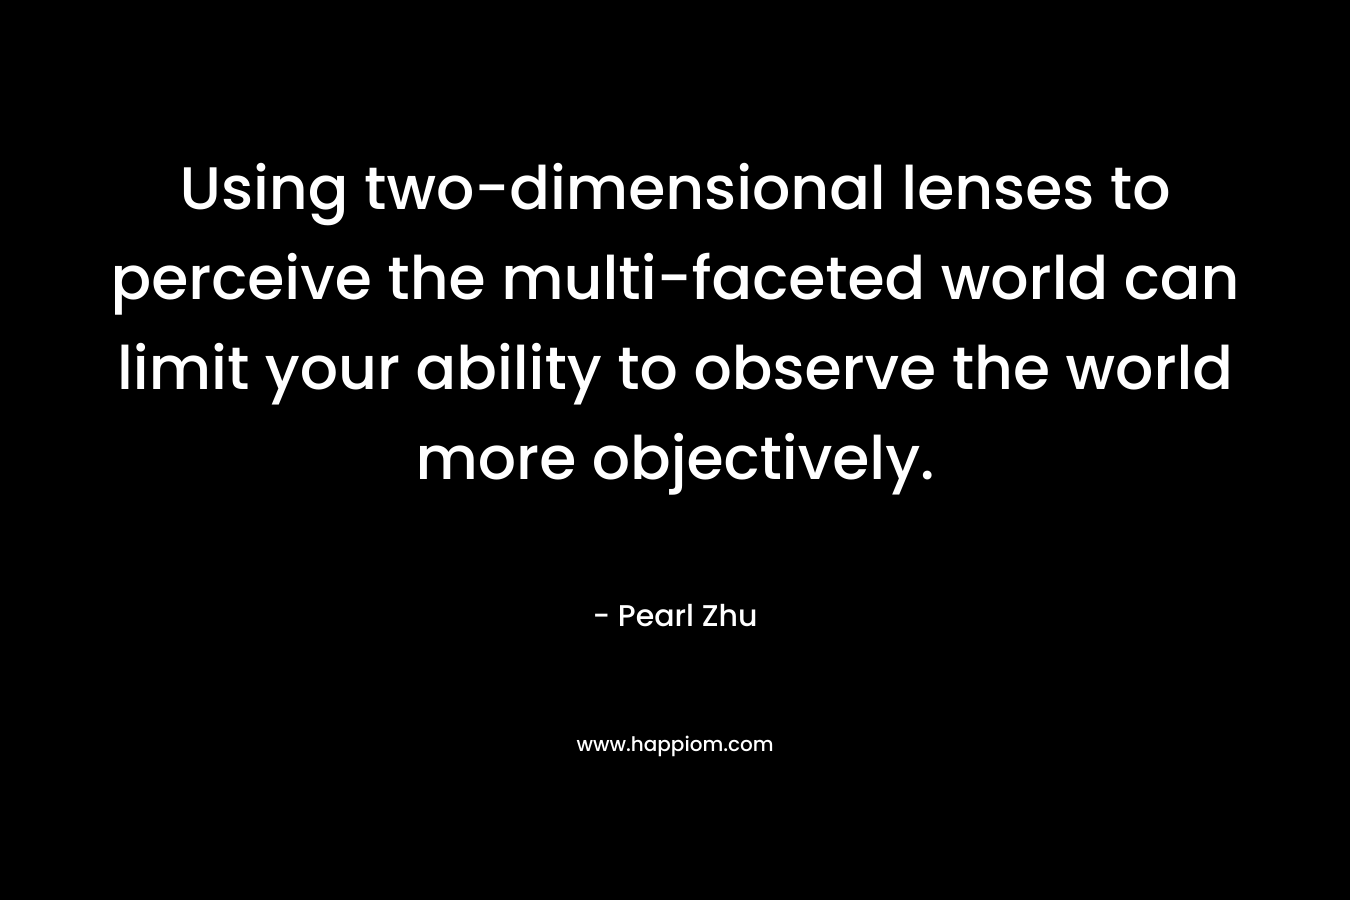 Using two-dimensional lenses to perceive the multi-faceted world can limit your ability to observe the world more objectively.